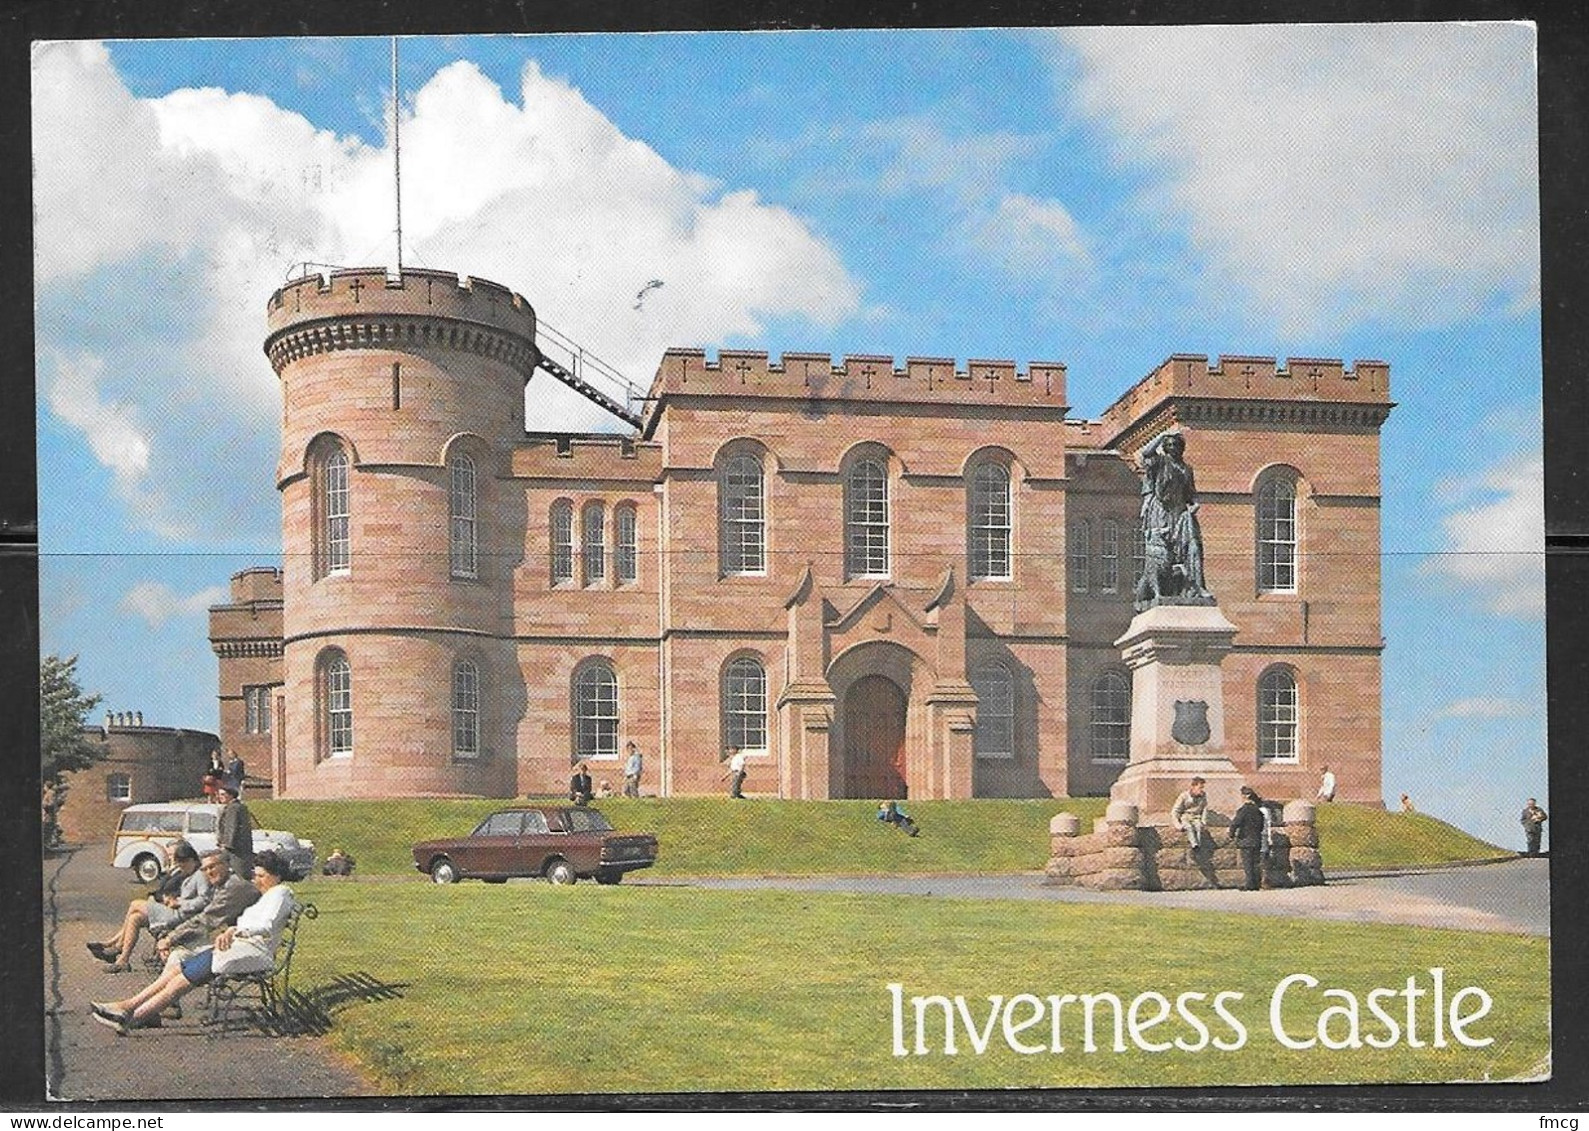 Inverness Castle, Mailed In 1989 To USA - Inverness-shire